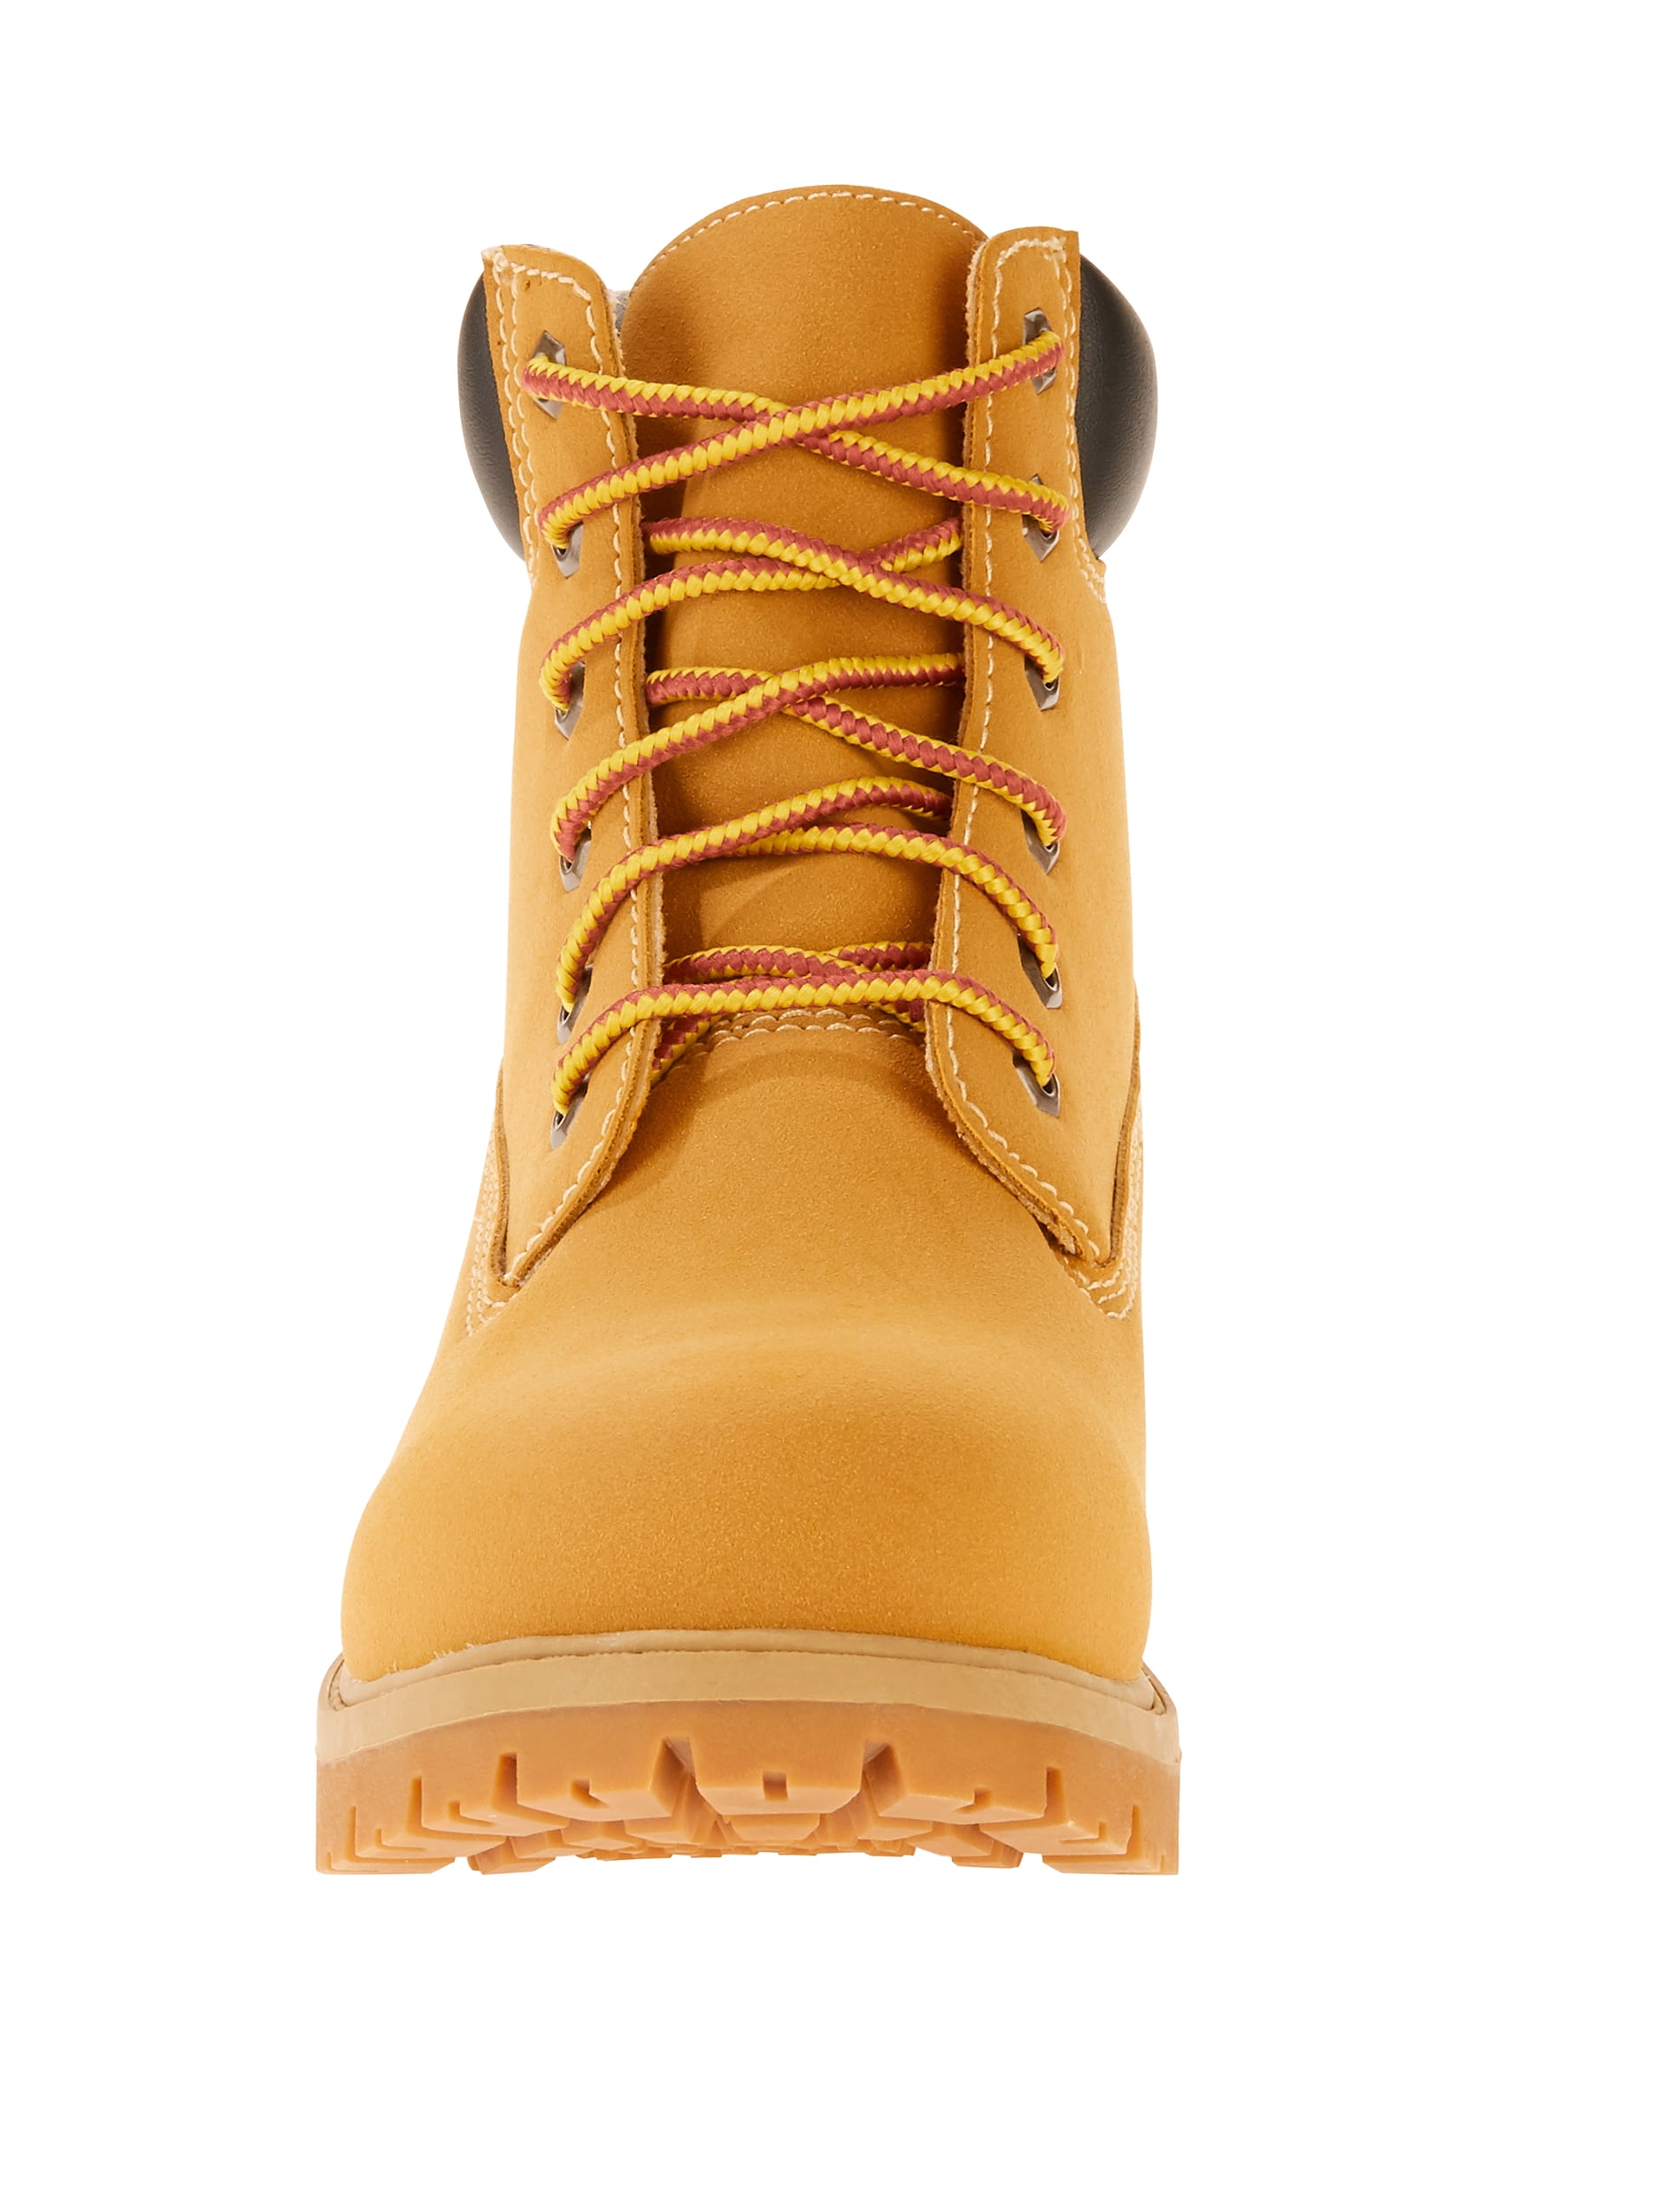 mens wheat colored boots